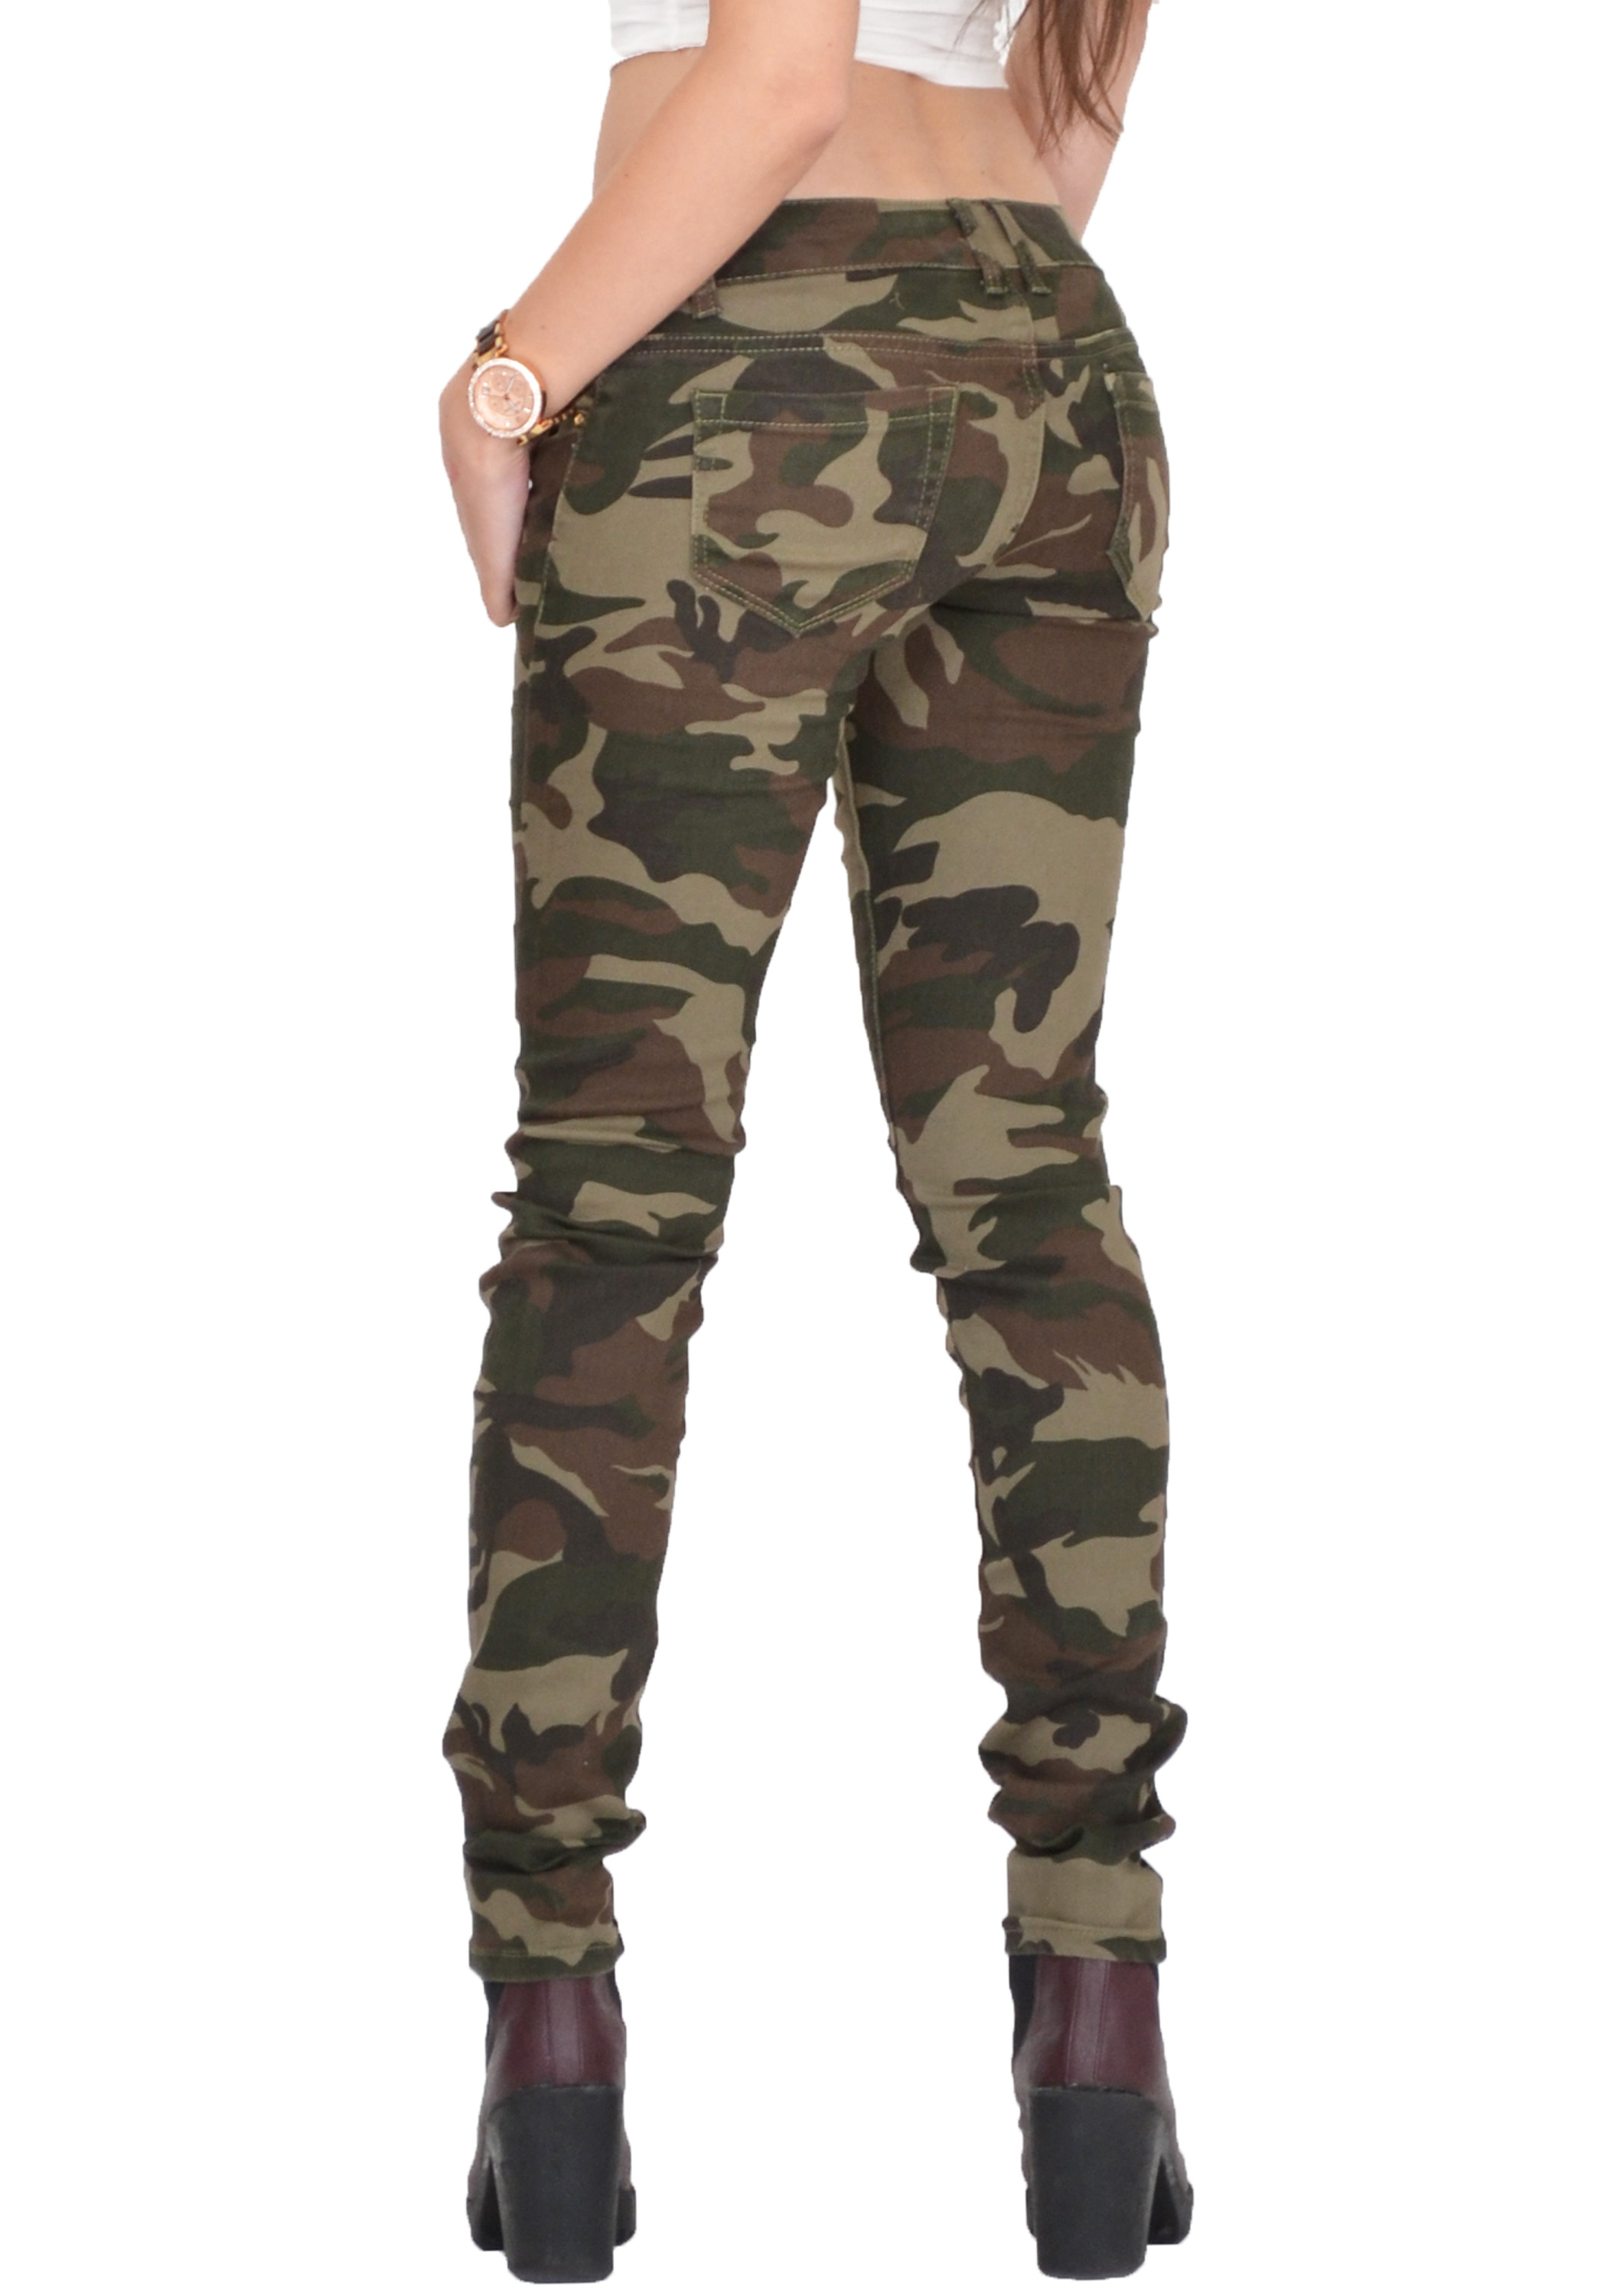 Womens Army Military Green Camouflage Skinny Slim Stretch Jeans Pants ...